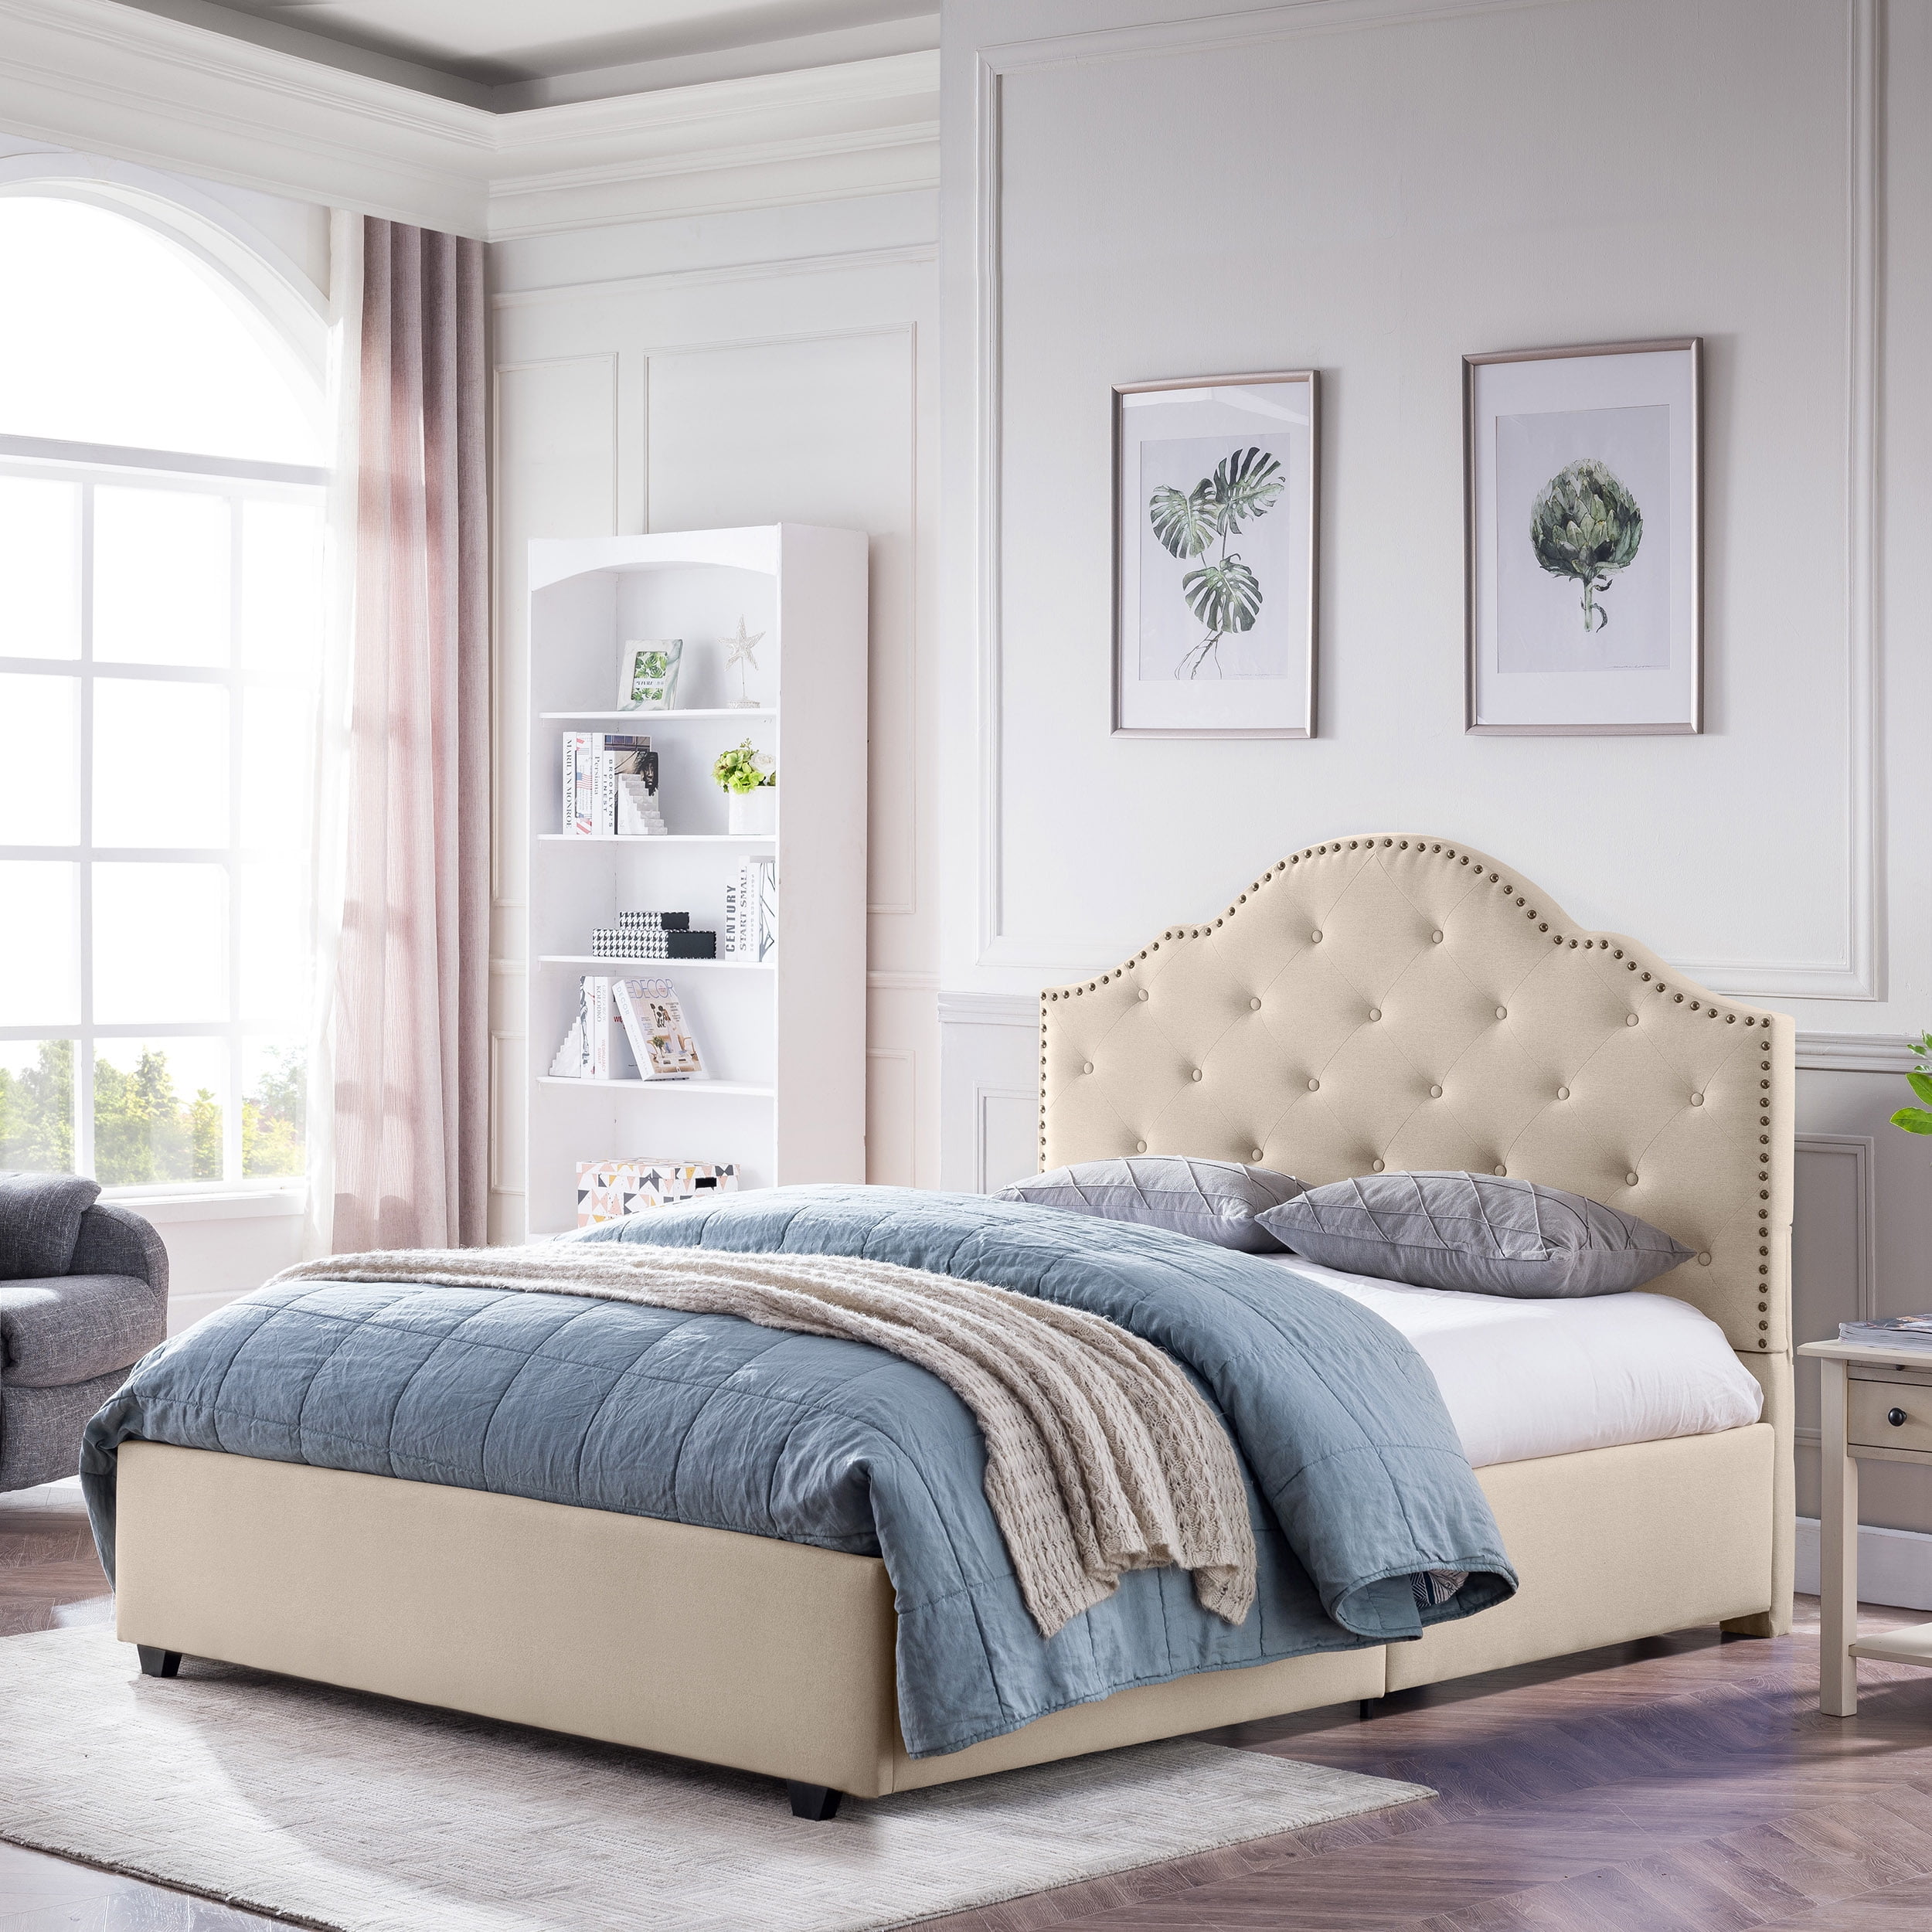 Gentry Contemporary Button-Tufted Upholstered Queen Bed Frame with